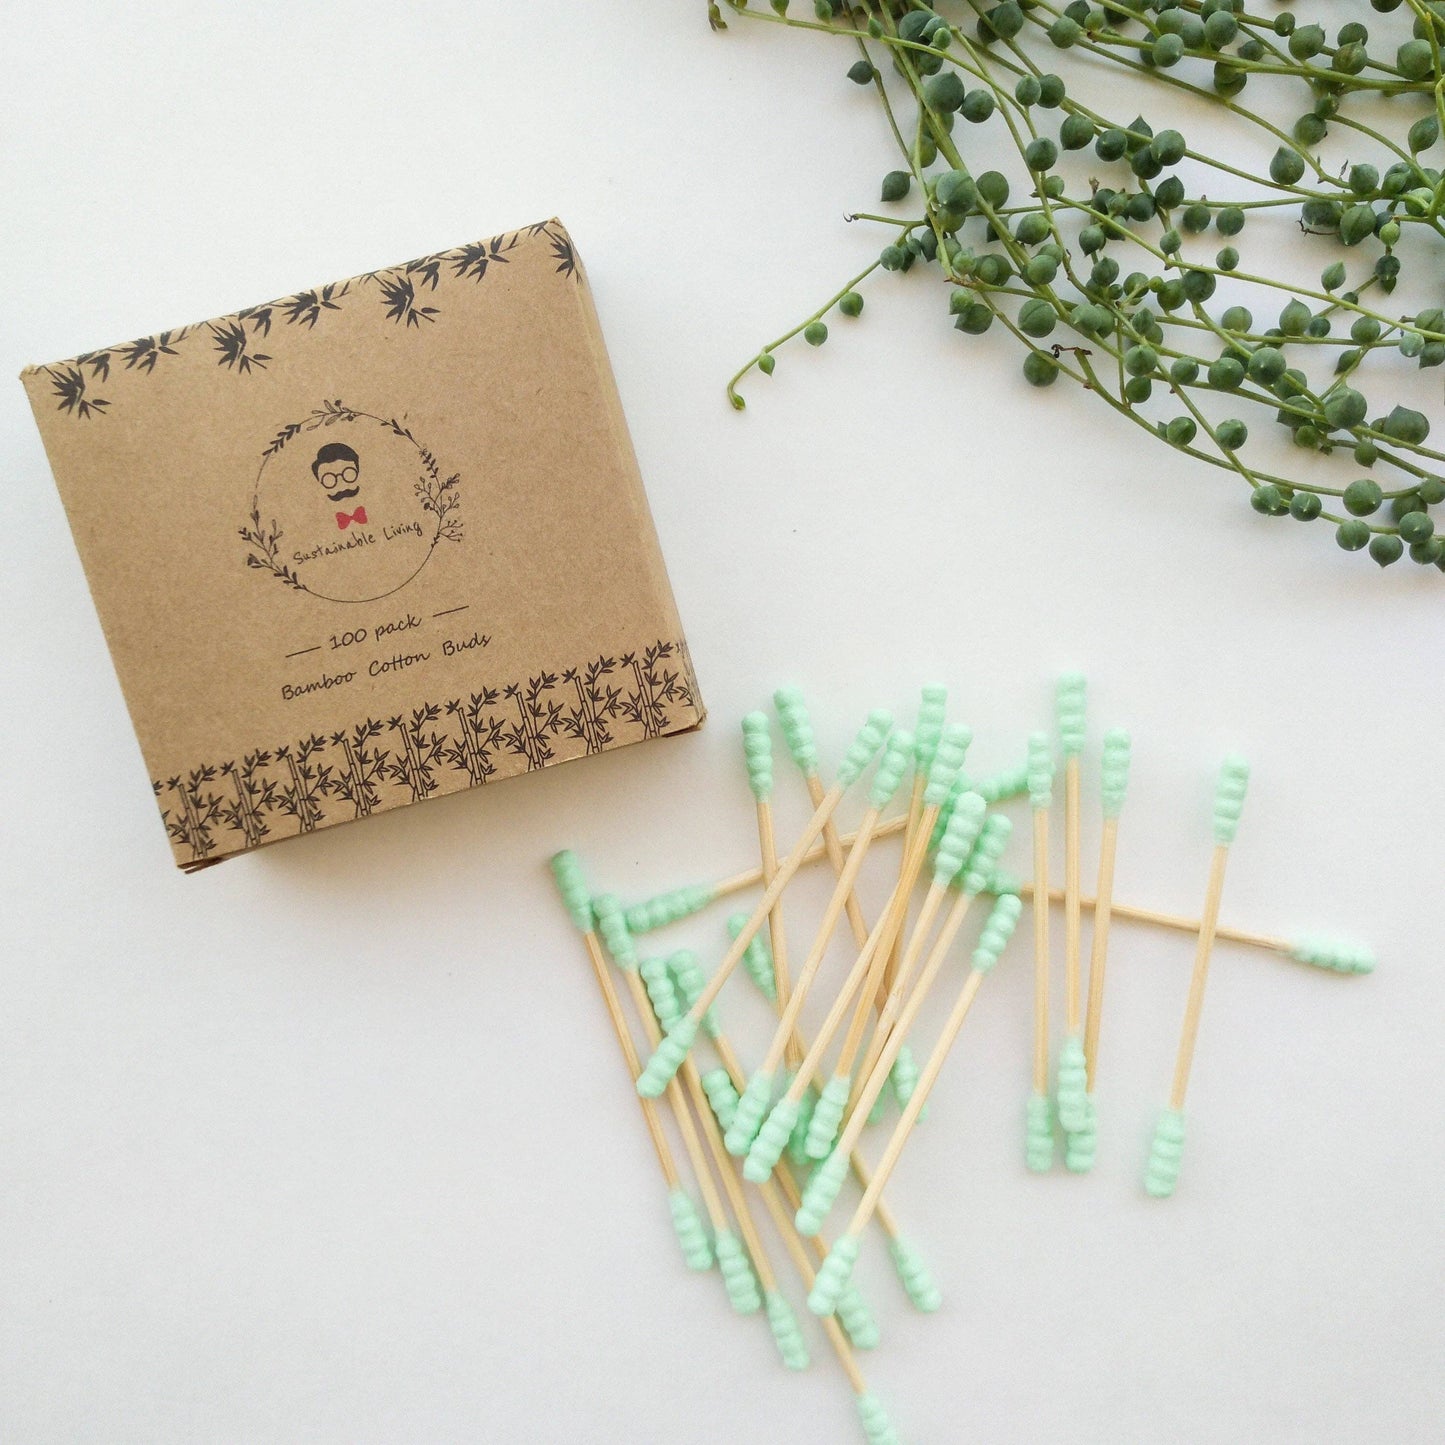 Organic Bamboo Cotton Buds - Biodegradable - 100 Pack: White